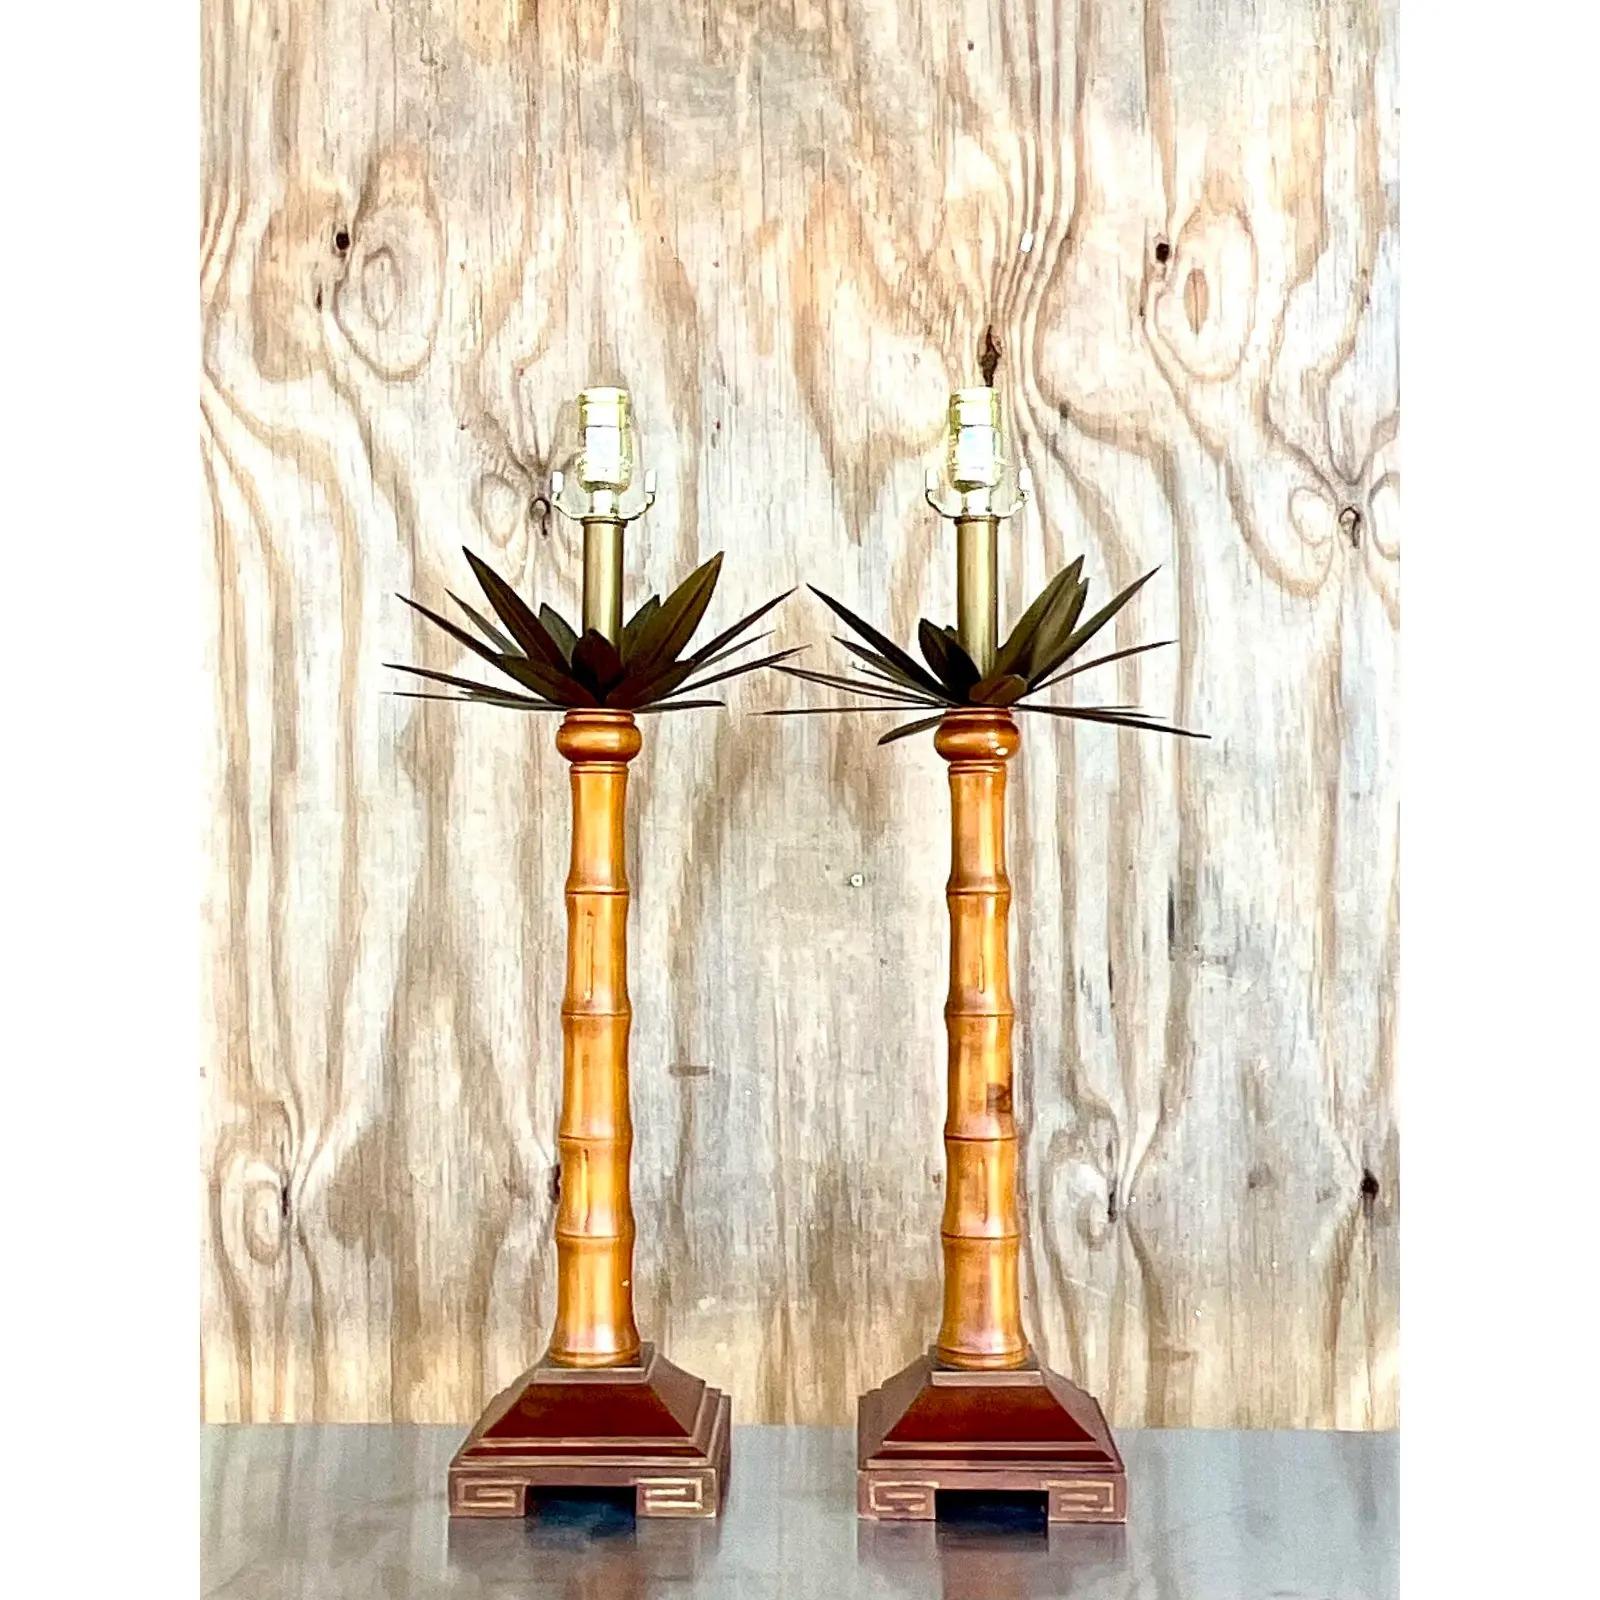 North American Vintage Coastal Brass and Wood Palm Tree Table Lamps - a Pair